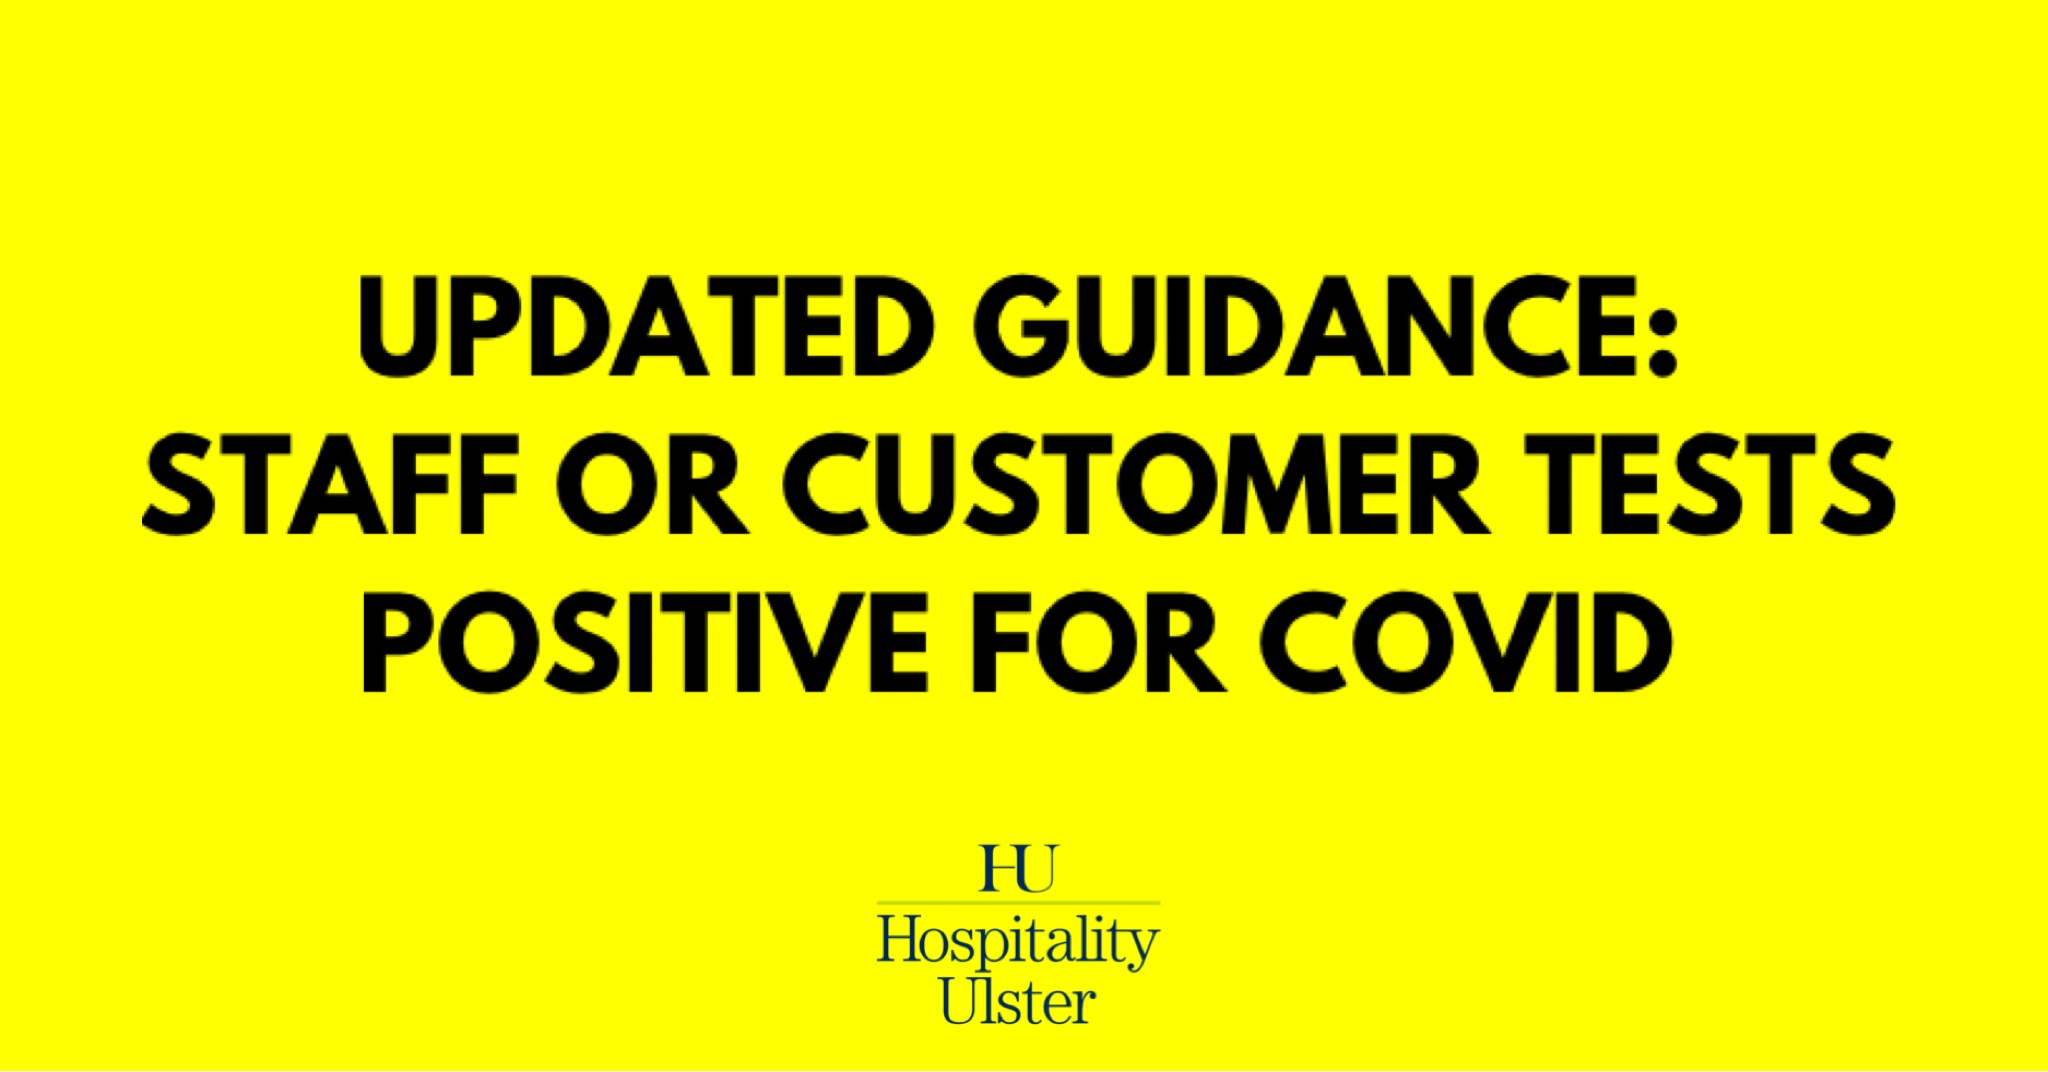 UPDATED GUIDANCE - STAFF OR CUSTOMER TESTS POSITIVE FOR COVID